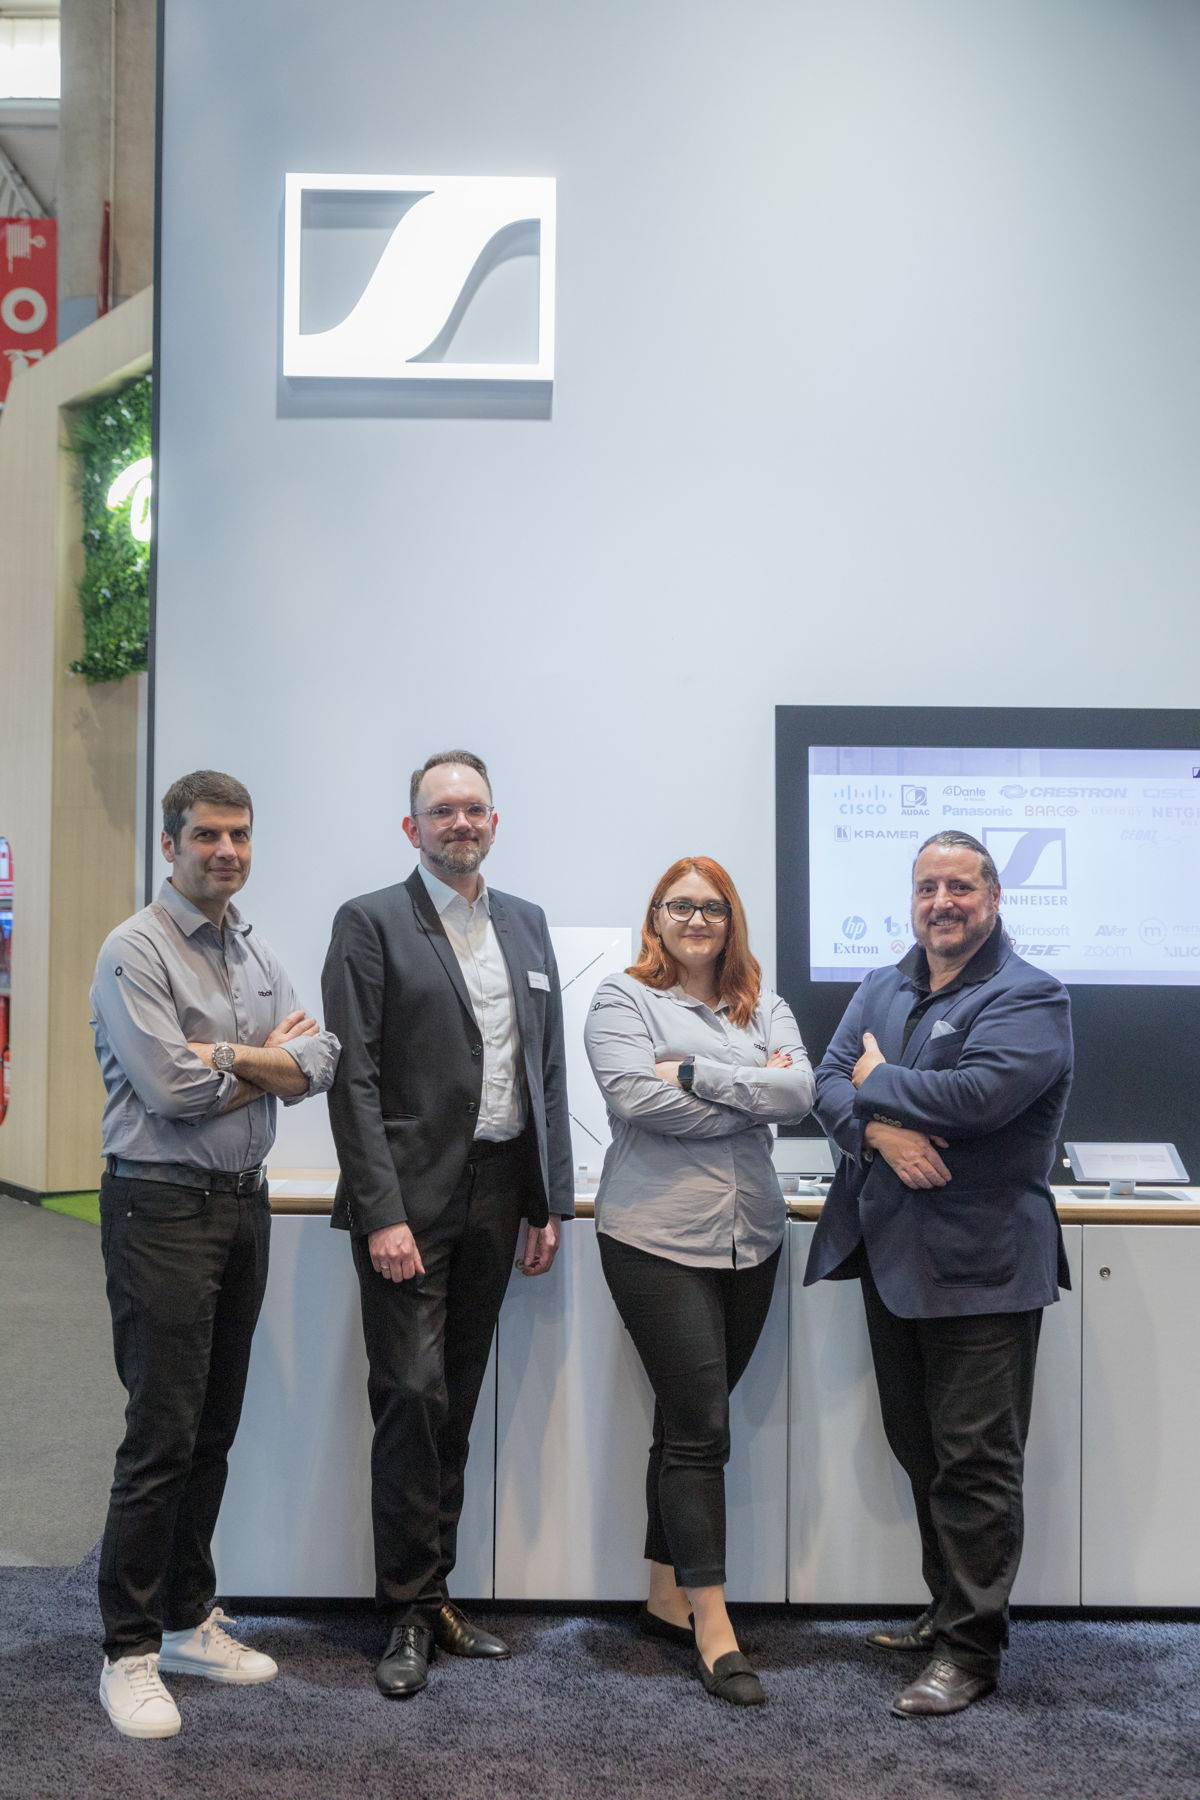 From left to right: Enrico Giannotti [Managing Director, CEDAT85], Selena Gray [Marketing Director, CEDAT85], Kai Tossing [Head of Product Management Business Communication at Sennheiser], Stefano Aldrovandi [Head of International Operations, CEDAT85]